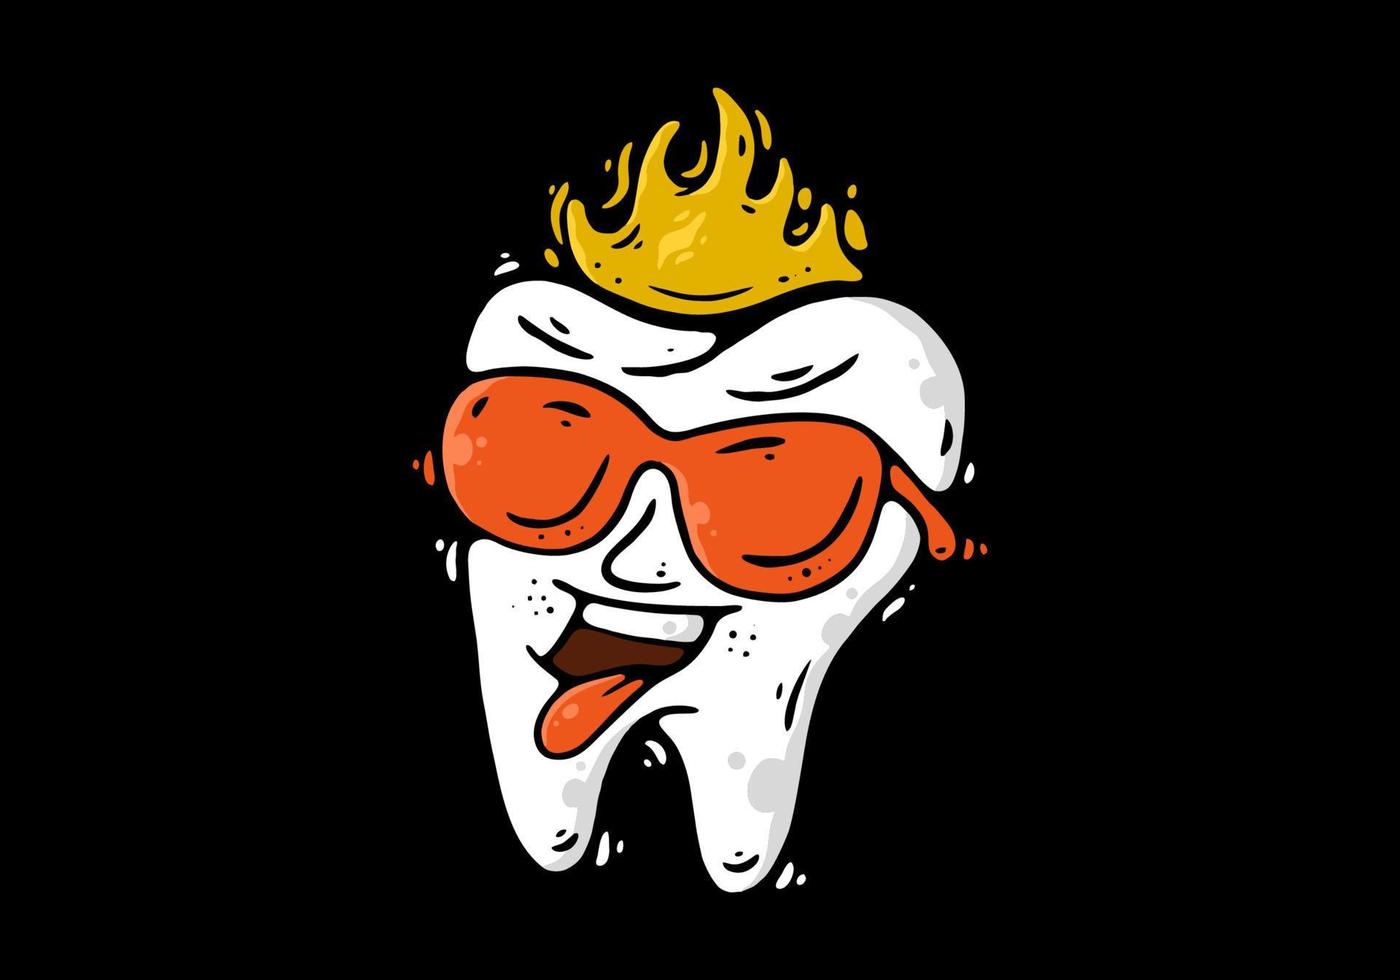 Illustration character design of a tooth wearing sunglasses vector